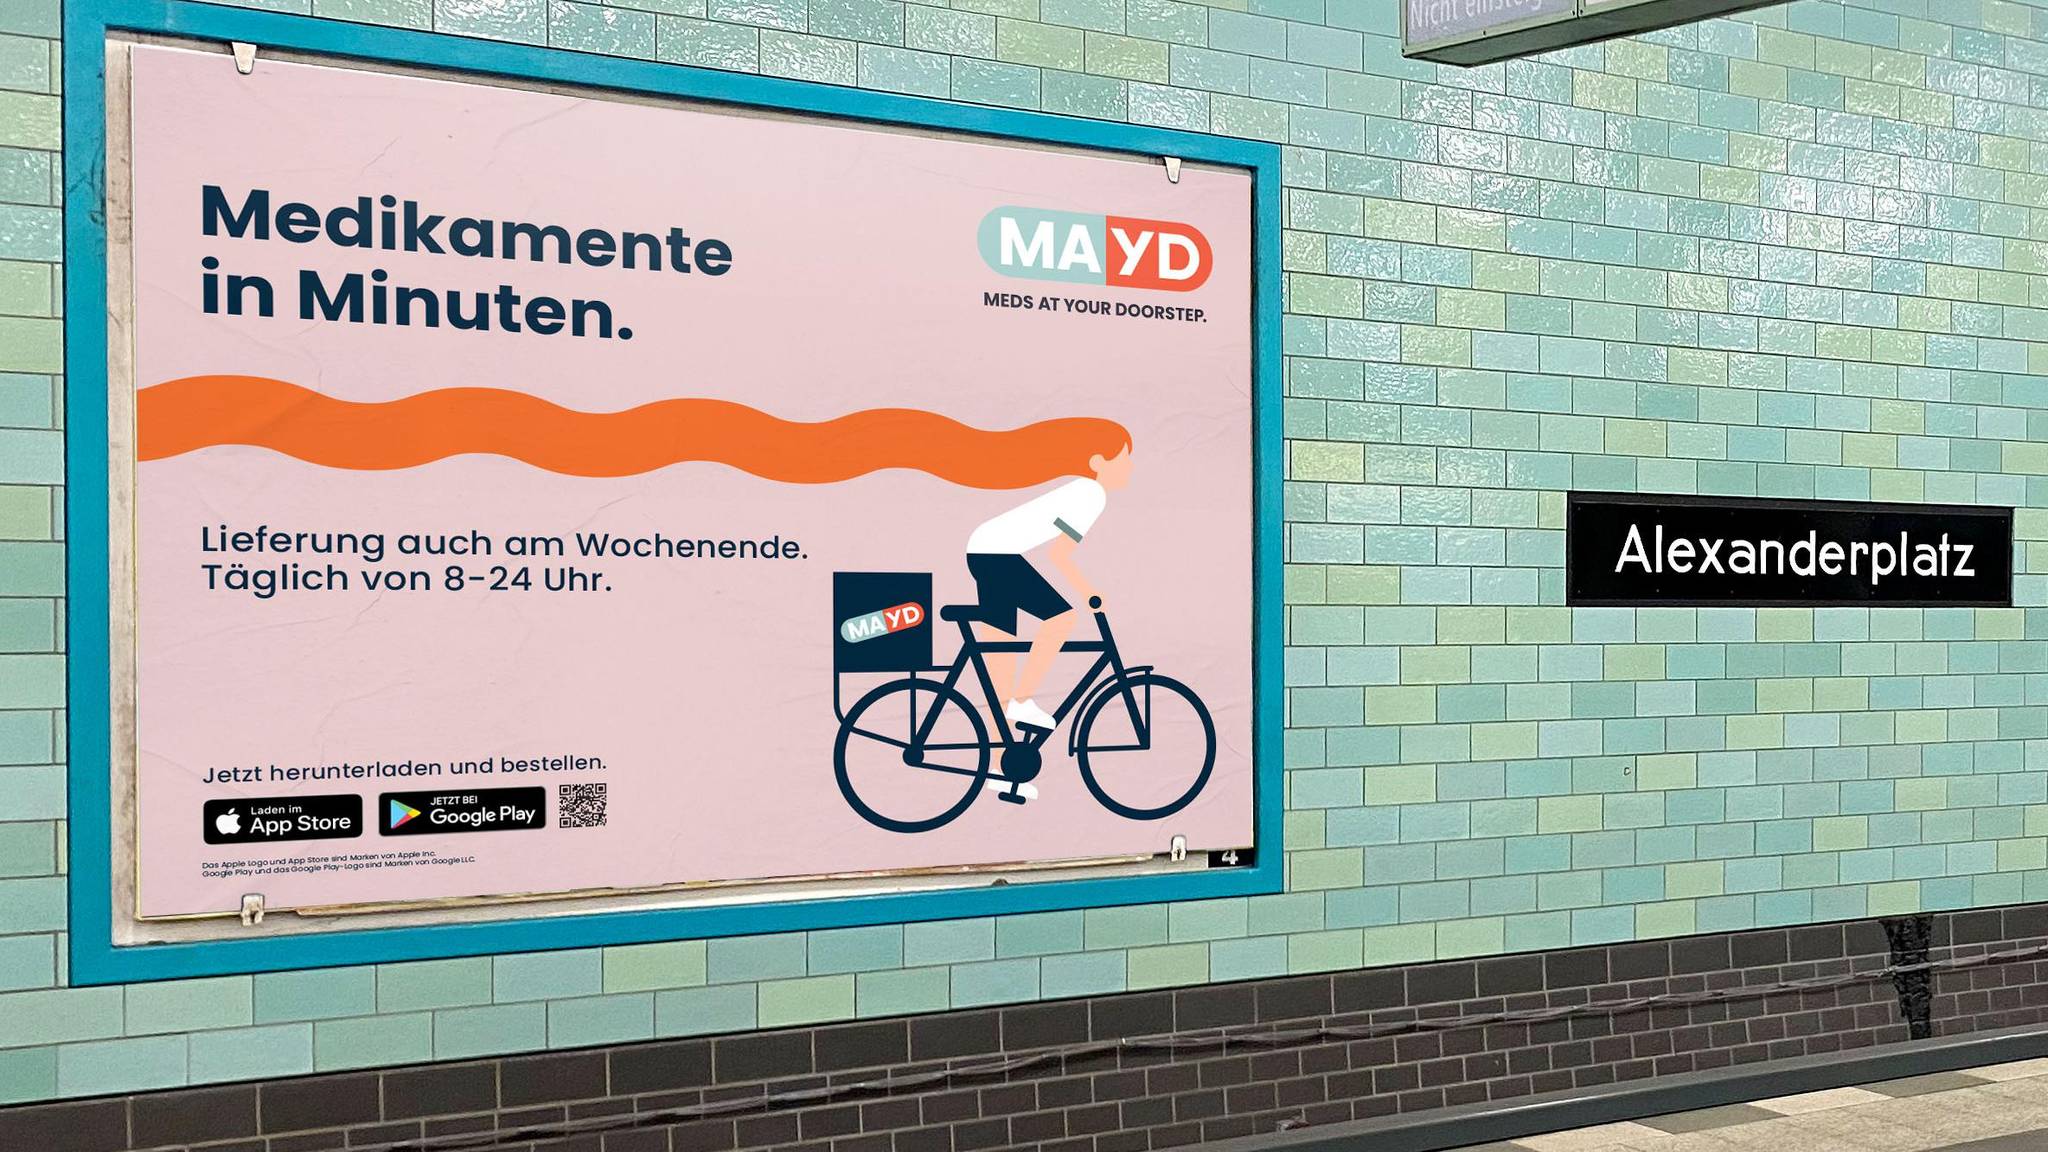 MAYD: making pharmaceuticals convenient for Germans